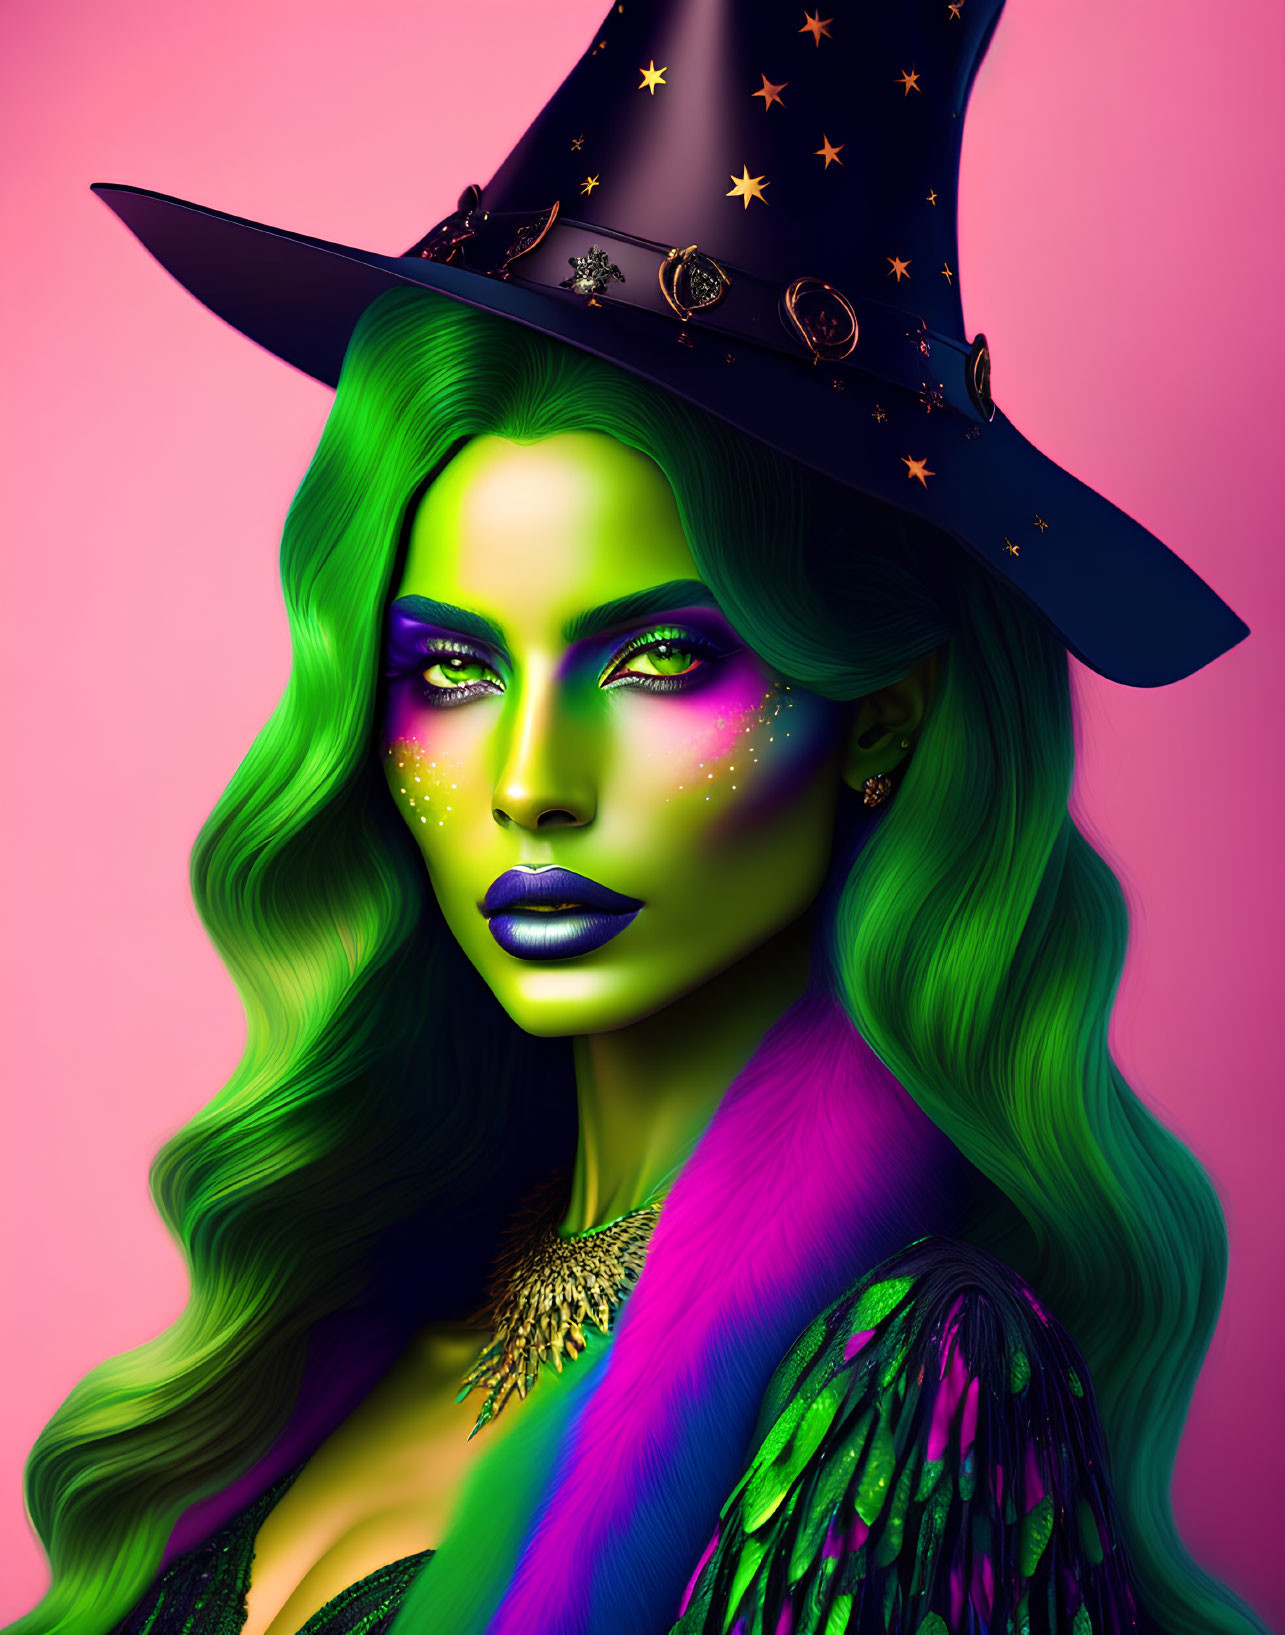 Colorful digital artwork featuring woman with green hair, witch hat, stars, moons on pink backdrop